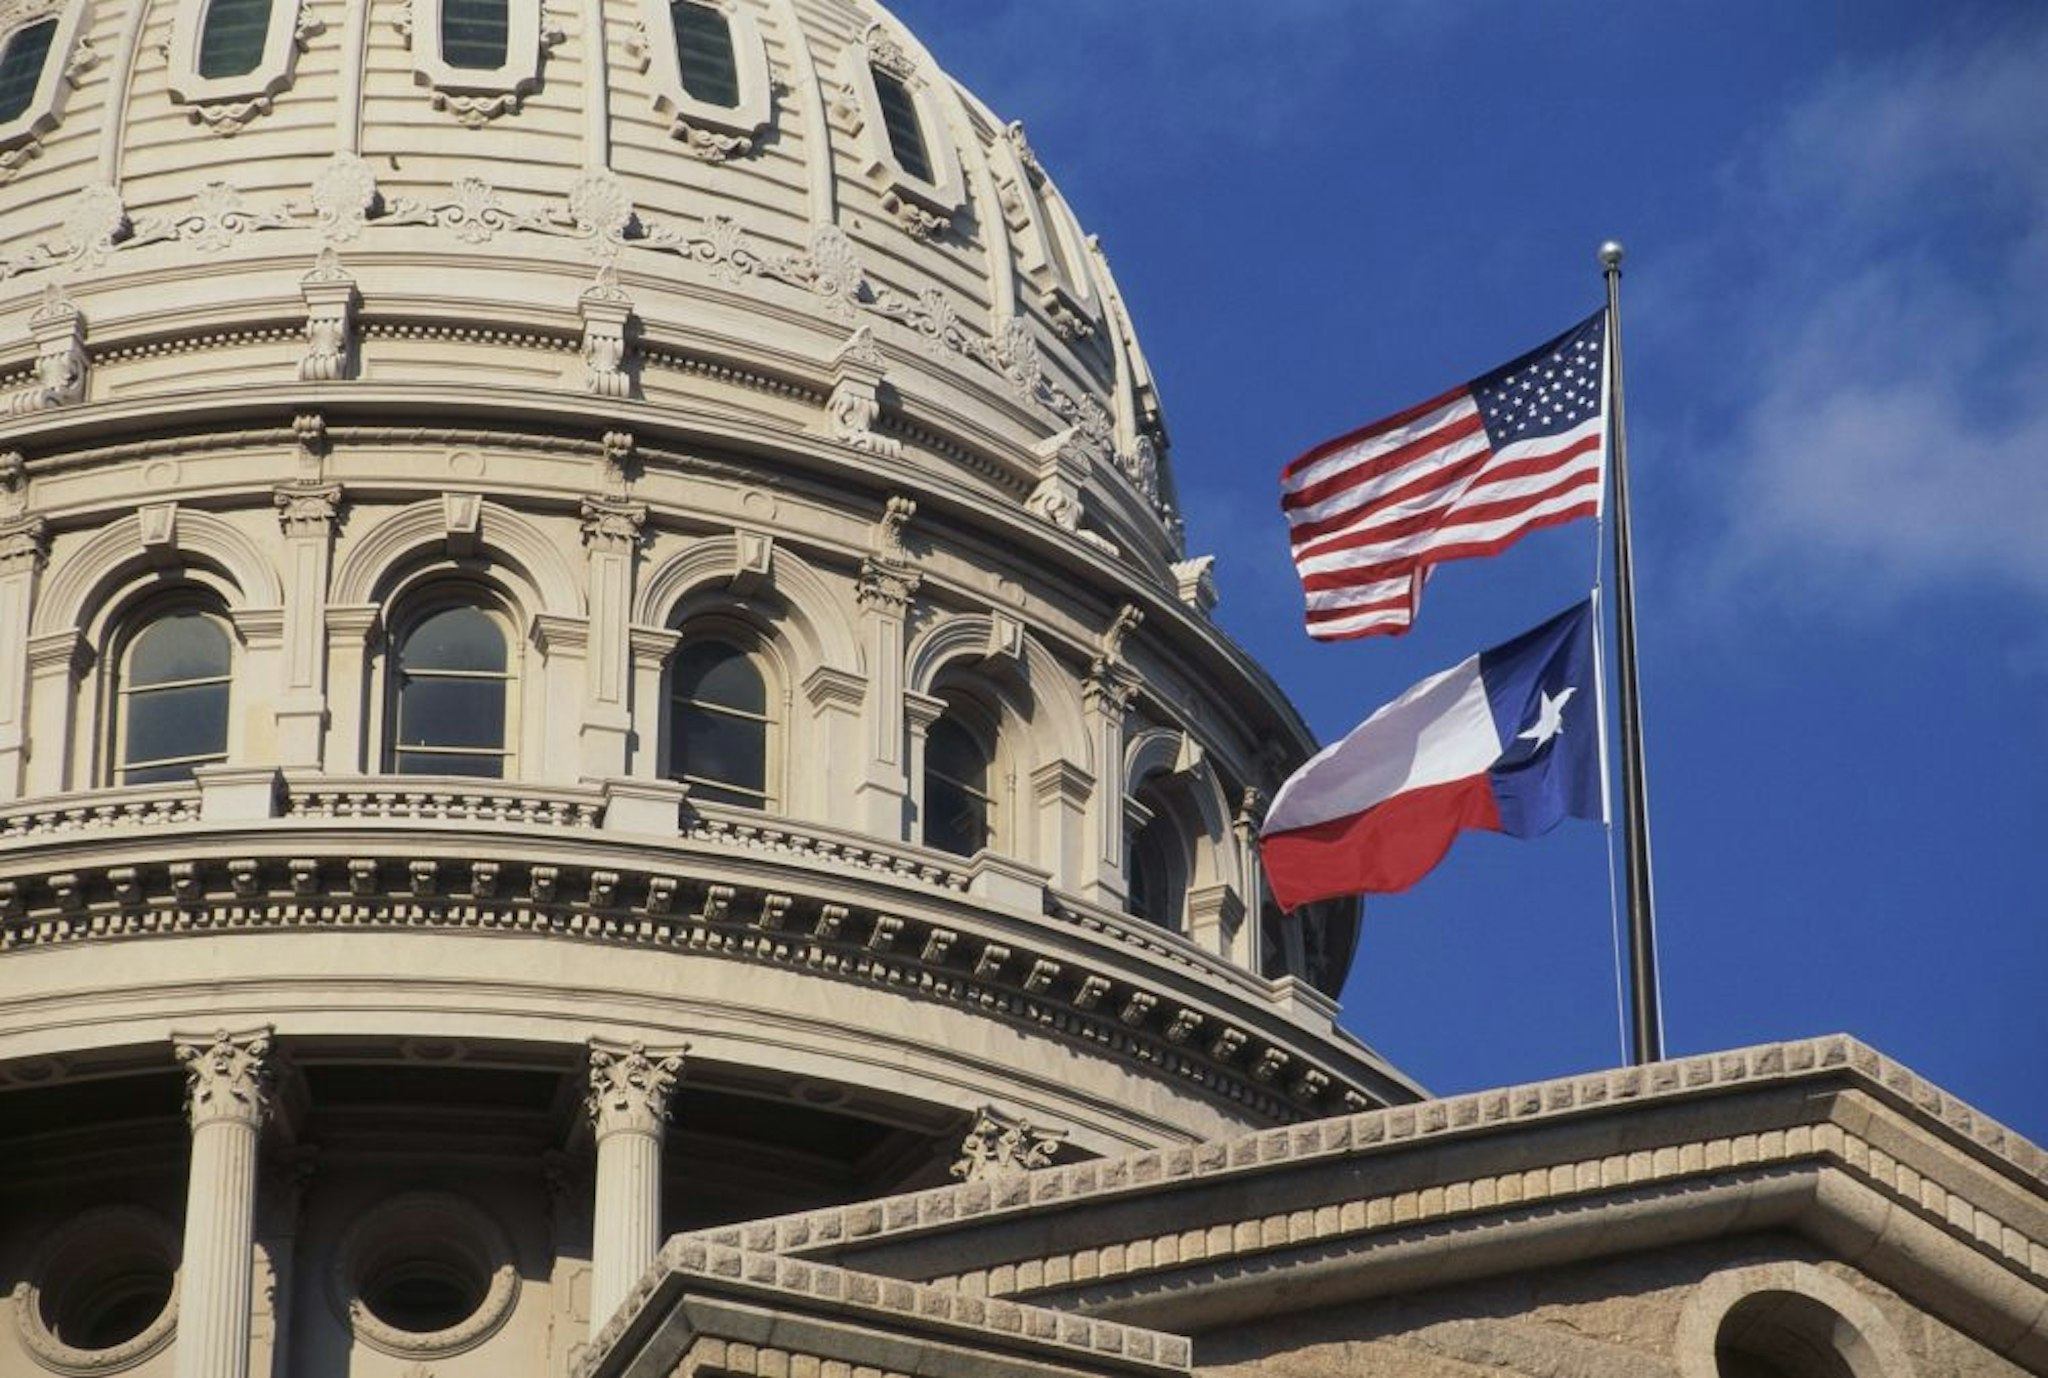 Texas State Capitol Dome and Flags